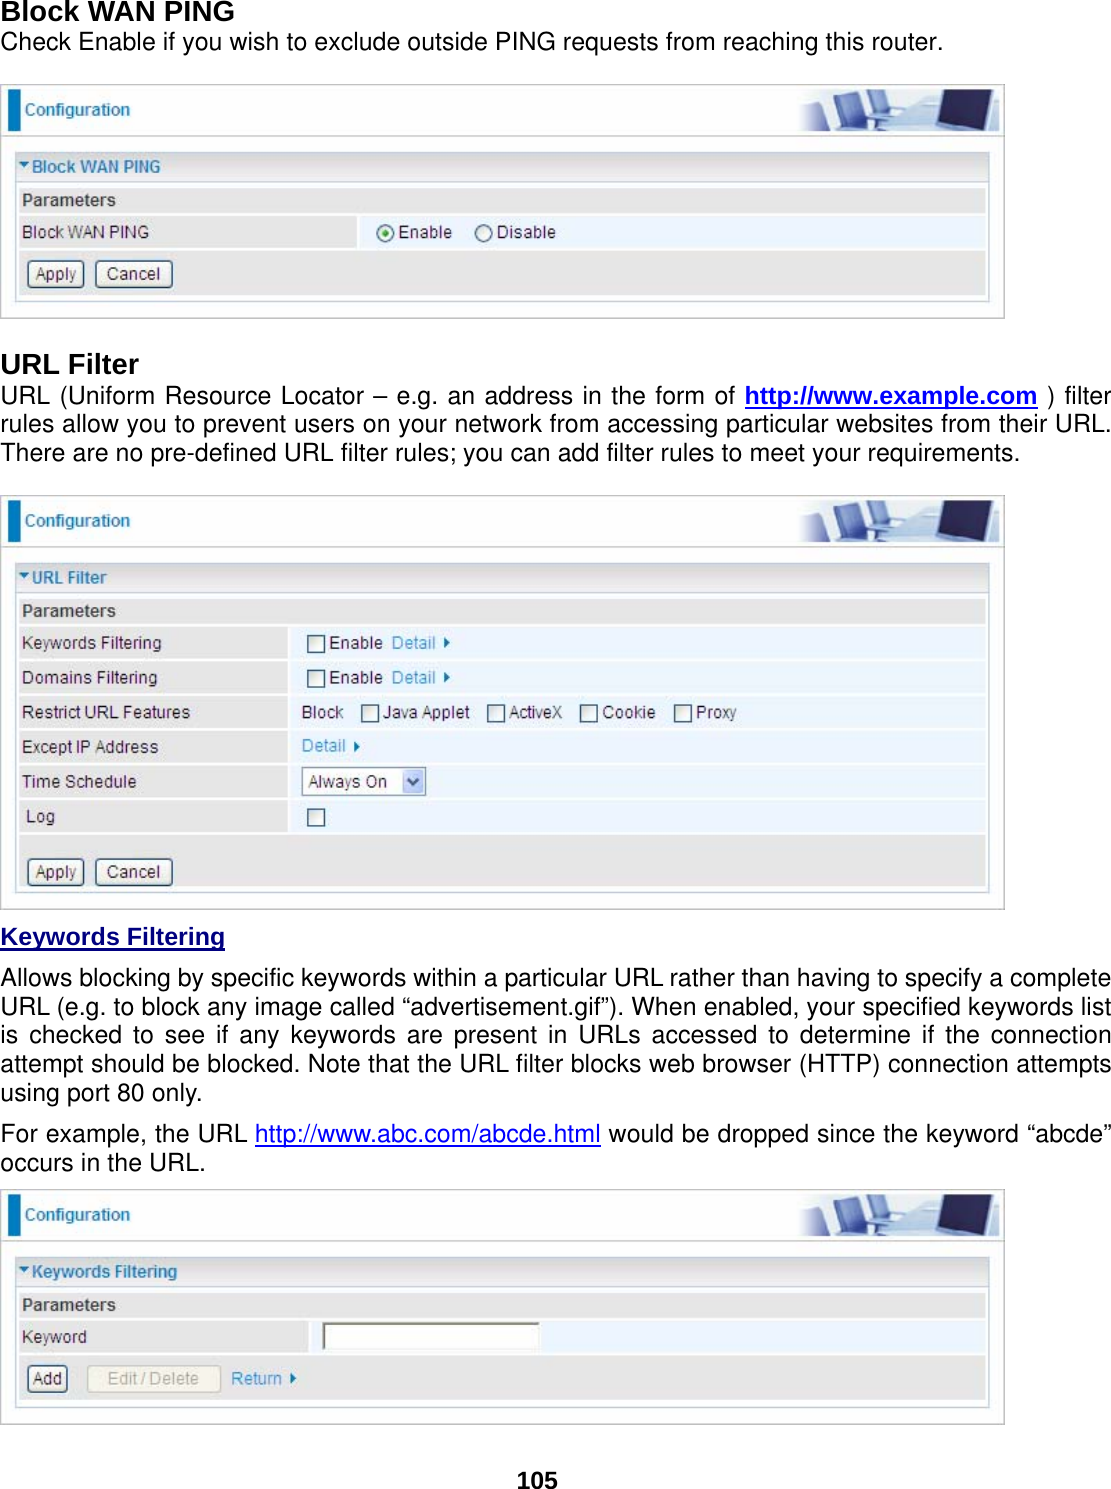  105 Block WAN PING Check Enable if you wish to exclude outside PING requests from reaching this router.    URL Filter URL (Uniform Resource Locator – e.g. an address in the form of http://www.example.com ) filter rules allow you to prevent users on your network from accessing particular websites from their URL. There are no pre-defined URL filter rules; you can add filter rules to meet your requirements.   Keywords Filtering  Allows blocking by specific keywords within a particular URL rather than having to specify a complete URL (e.g. to block any image called “advertisement.gif”). When enabled, your specified keywords list is checked to see if any keywords are present in URLs accessed to determine if the connection attempt should be blocked. Note that the URL filter blocks web browser (HTTP) connection attempts using port 80 only. For example, the URL http://www.abc.com/abcde.html would be dropped since the keyword “abcde” occurs in the URL.   